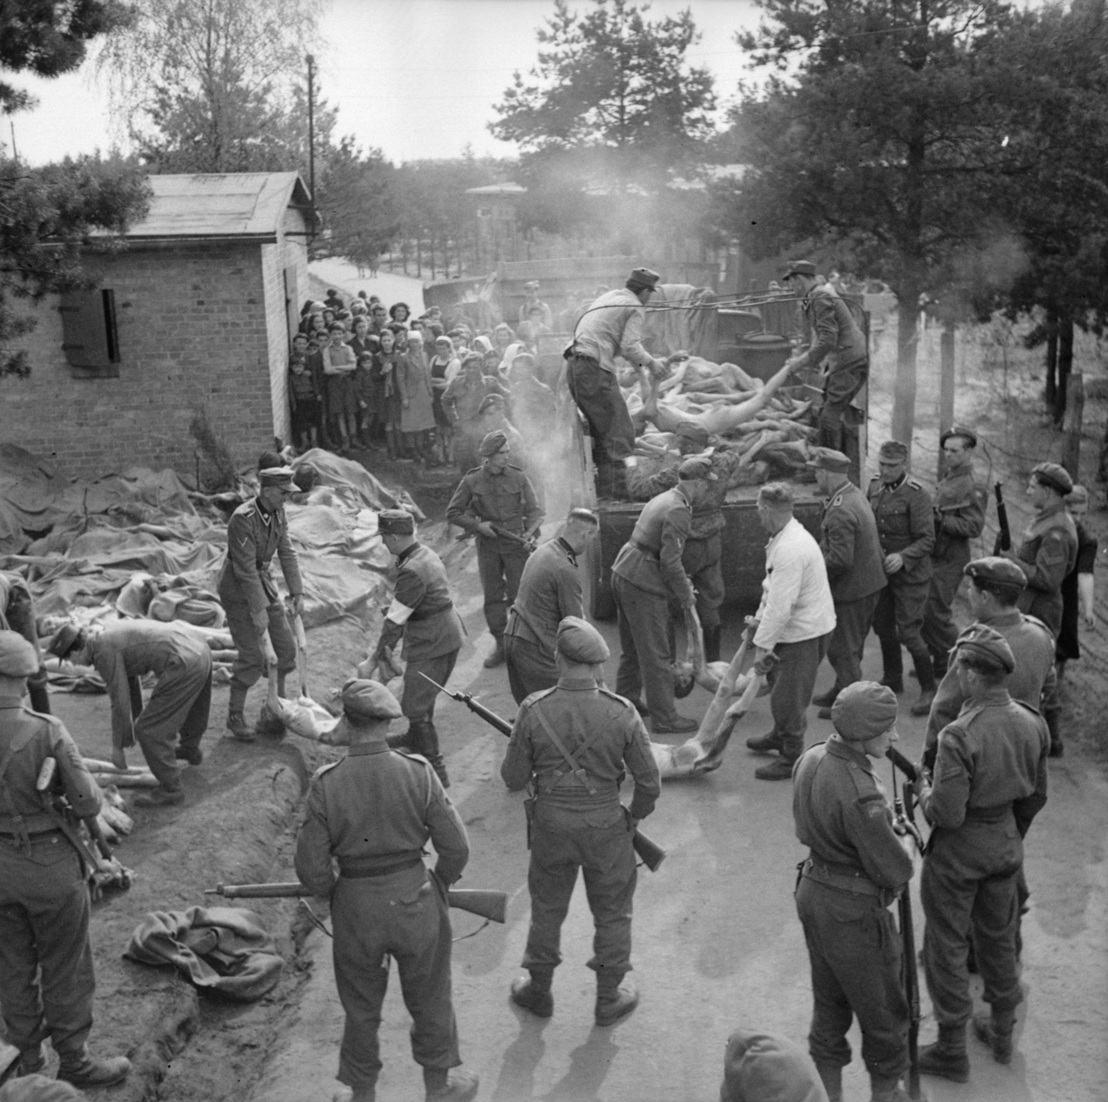 Arrested SS members carrying bodies, 17/18 April 1945. Photo by Sgt. Oakes. Imperial War Museum, London, Photograph Archive, BU 4025.